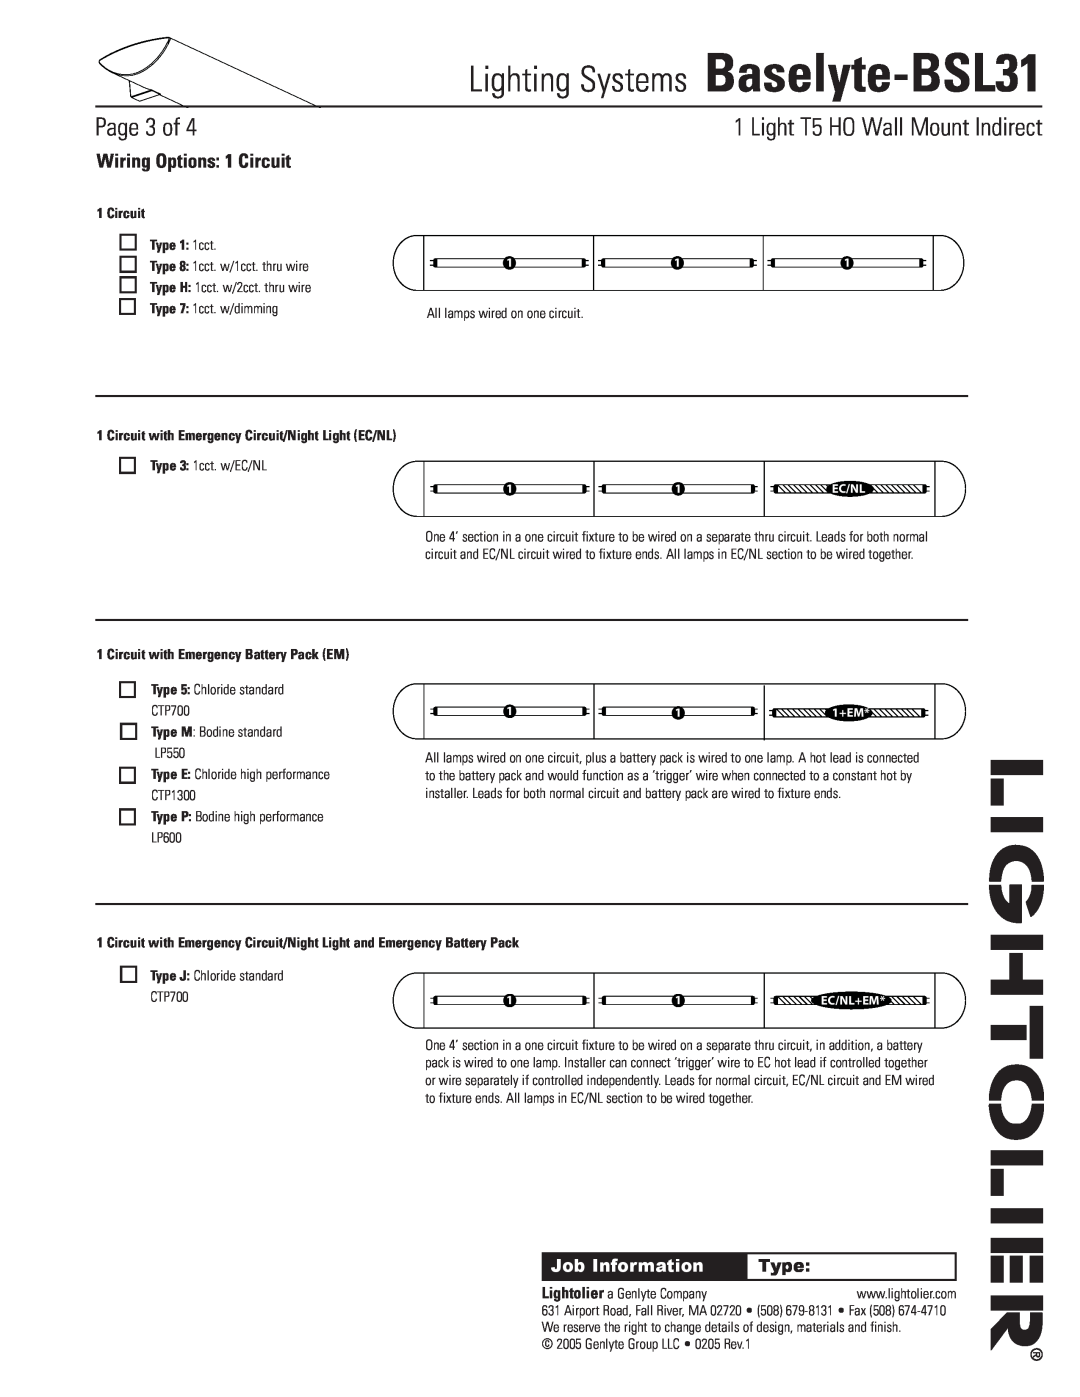 Lightolier Baselyte-BSL31 Wiring Options 1 Circuit, Circuit Type 1 1cct, Circuit with Emergency Battery Pack EM, Page of 